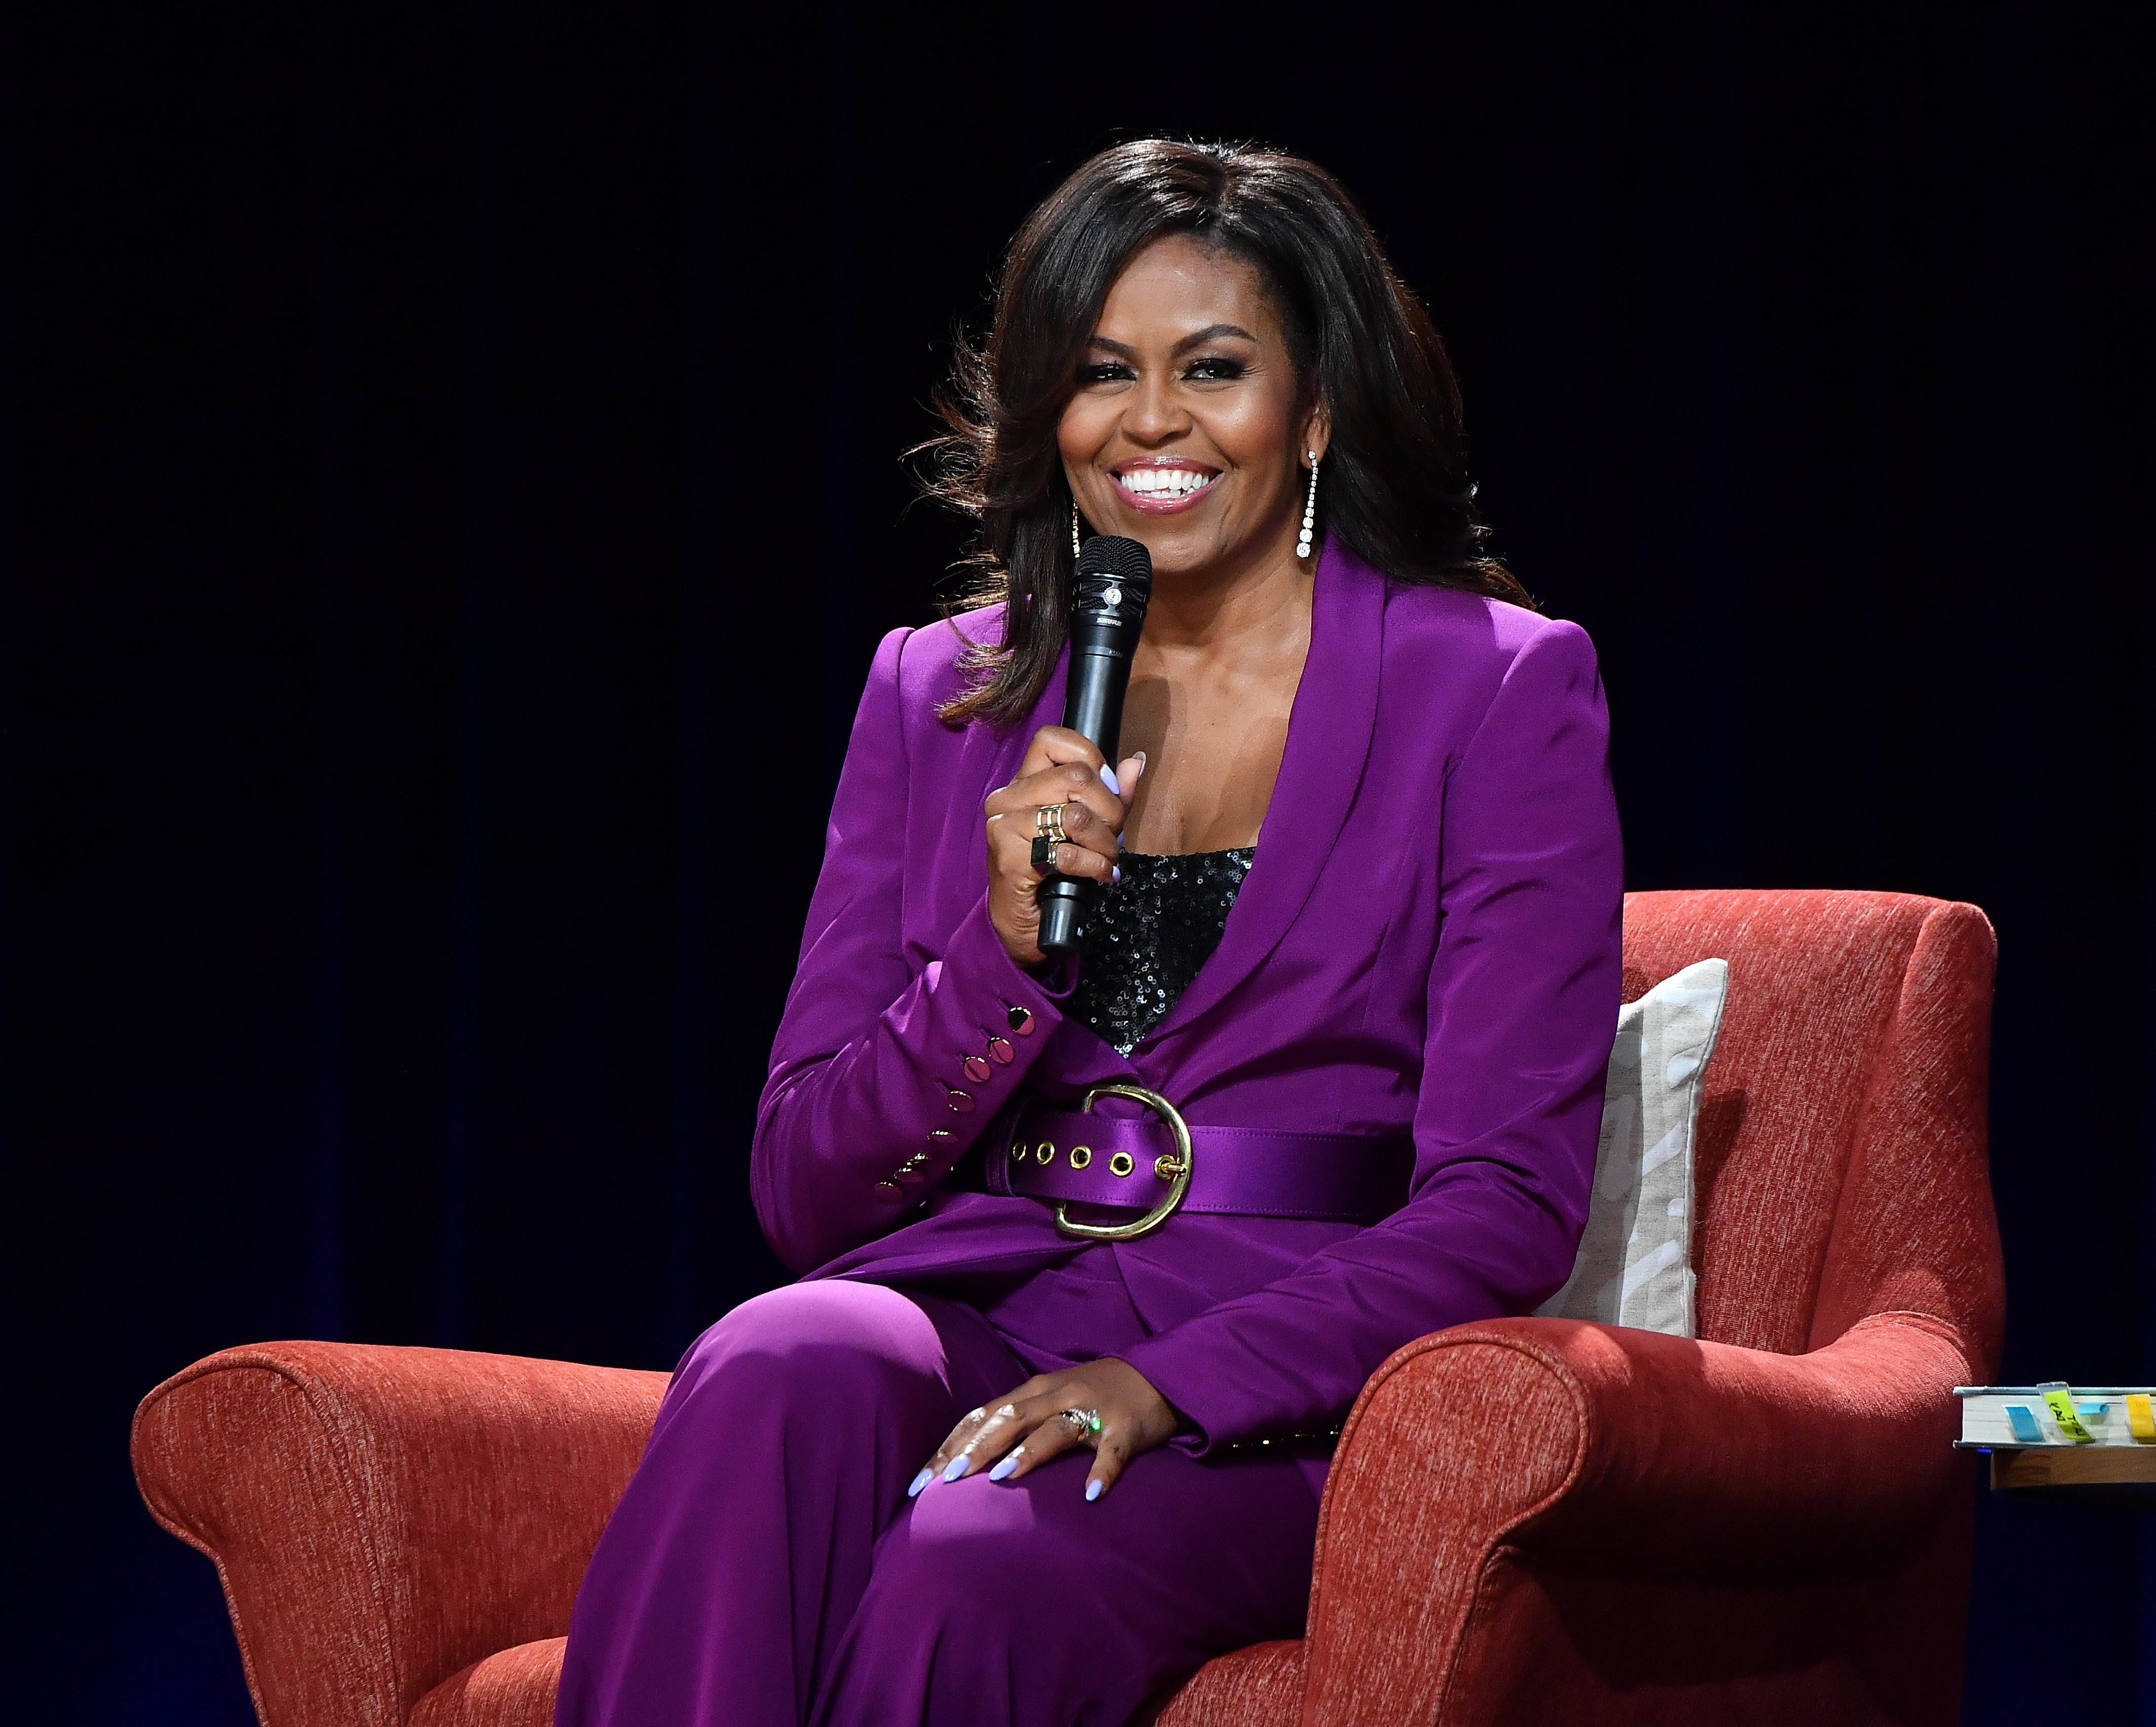 Michelle Obama attends "Becoming: An Intimate Conversation with Michelle Obama" at State Farm Arena on May 11, 2019. | Photo: Getty Images